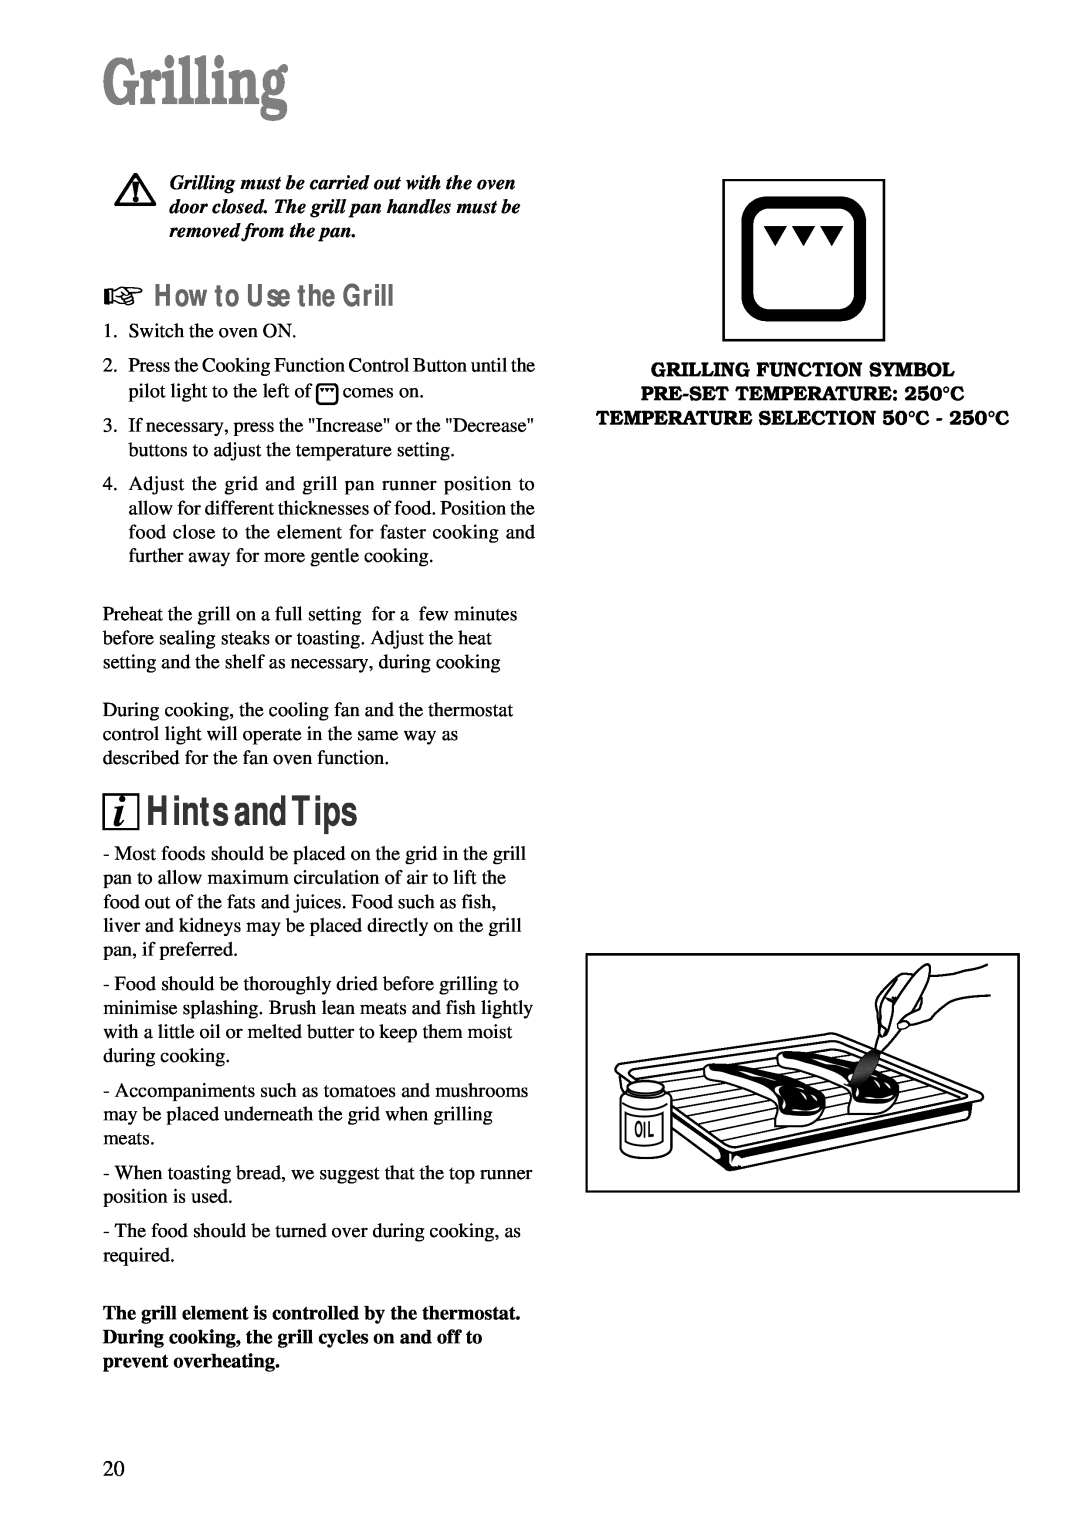 Zanussi ZBM 878 manual Grilling, How to Use the Grill, GRILLING FUNCTION SYMBOL PRE-SET TEMPERATURE 250C, i Hints andTips 